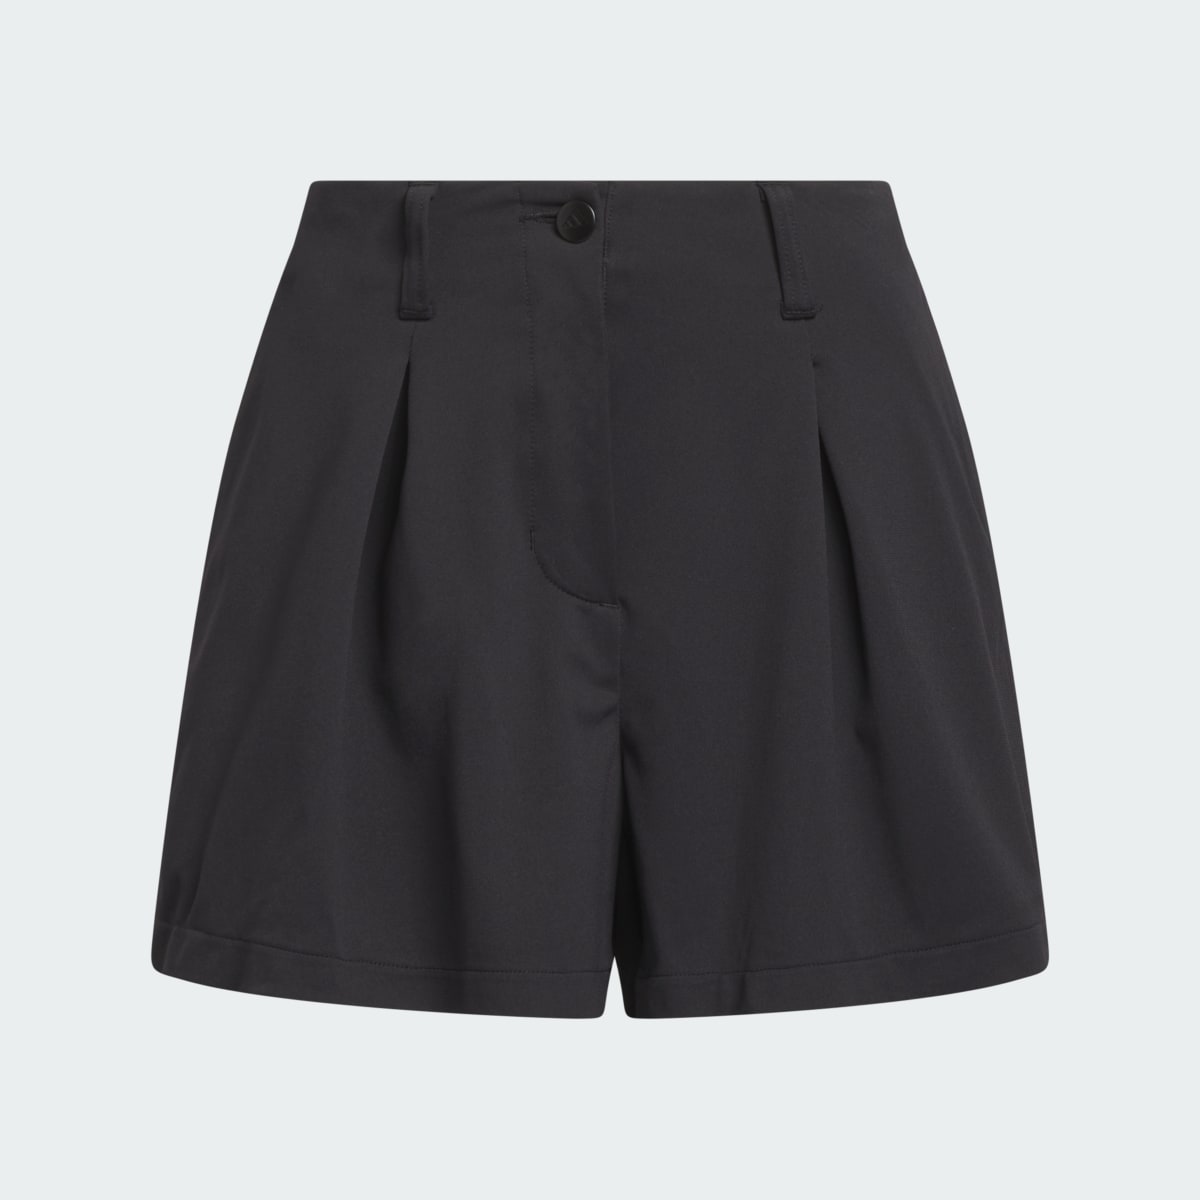 Adidas Short Go-To Pleated. 4